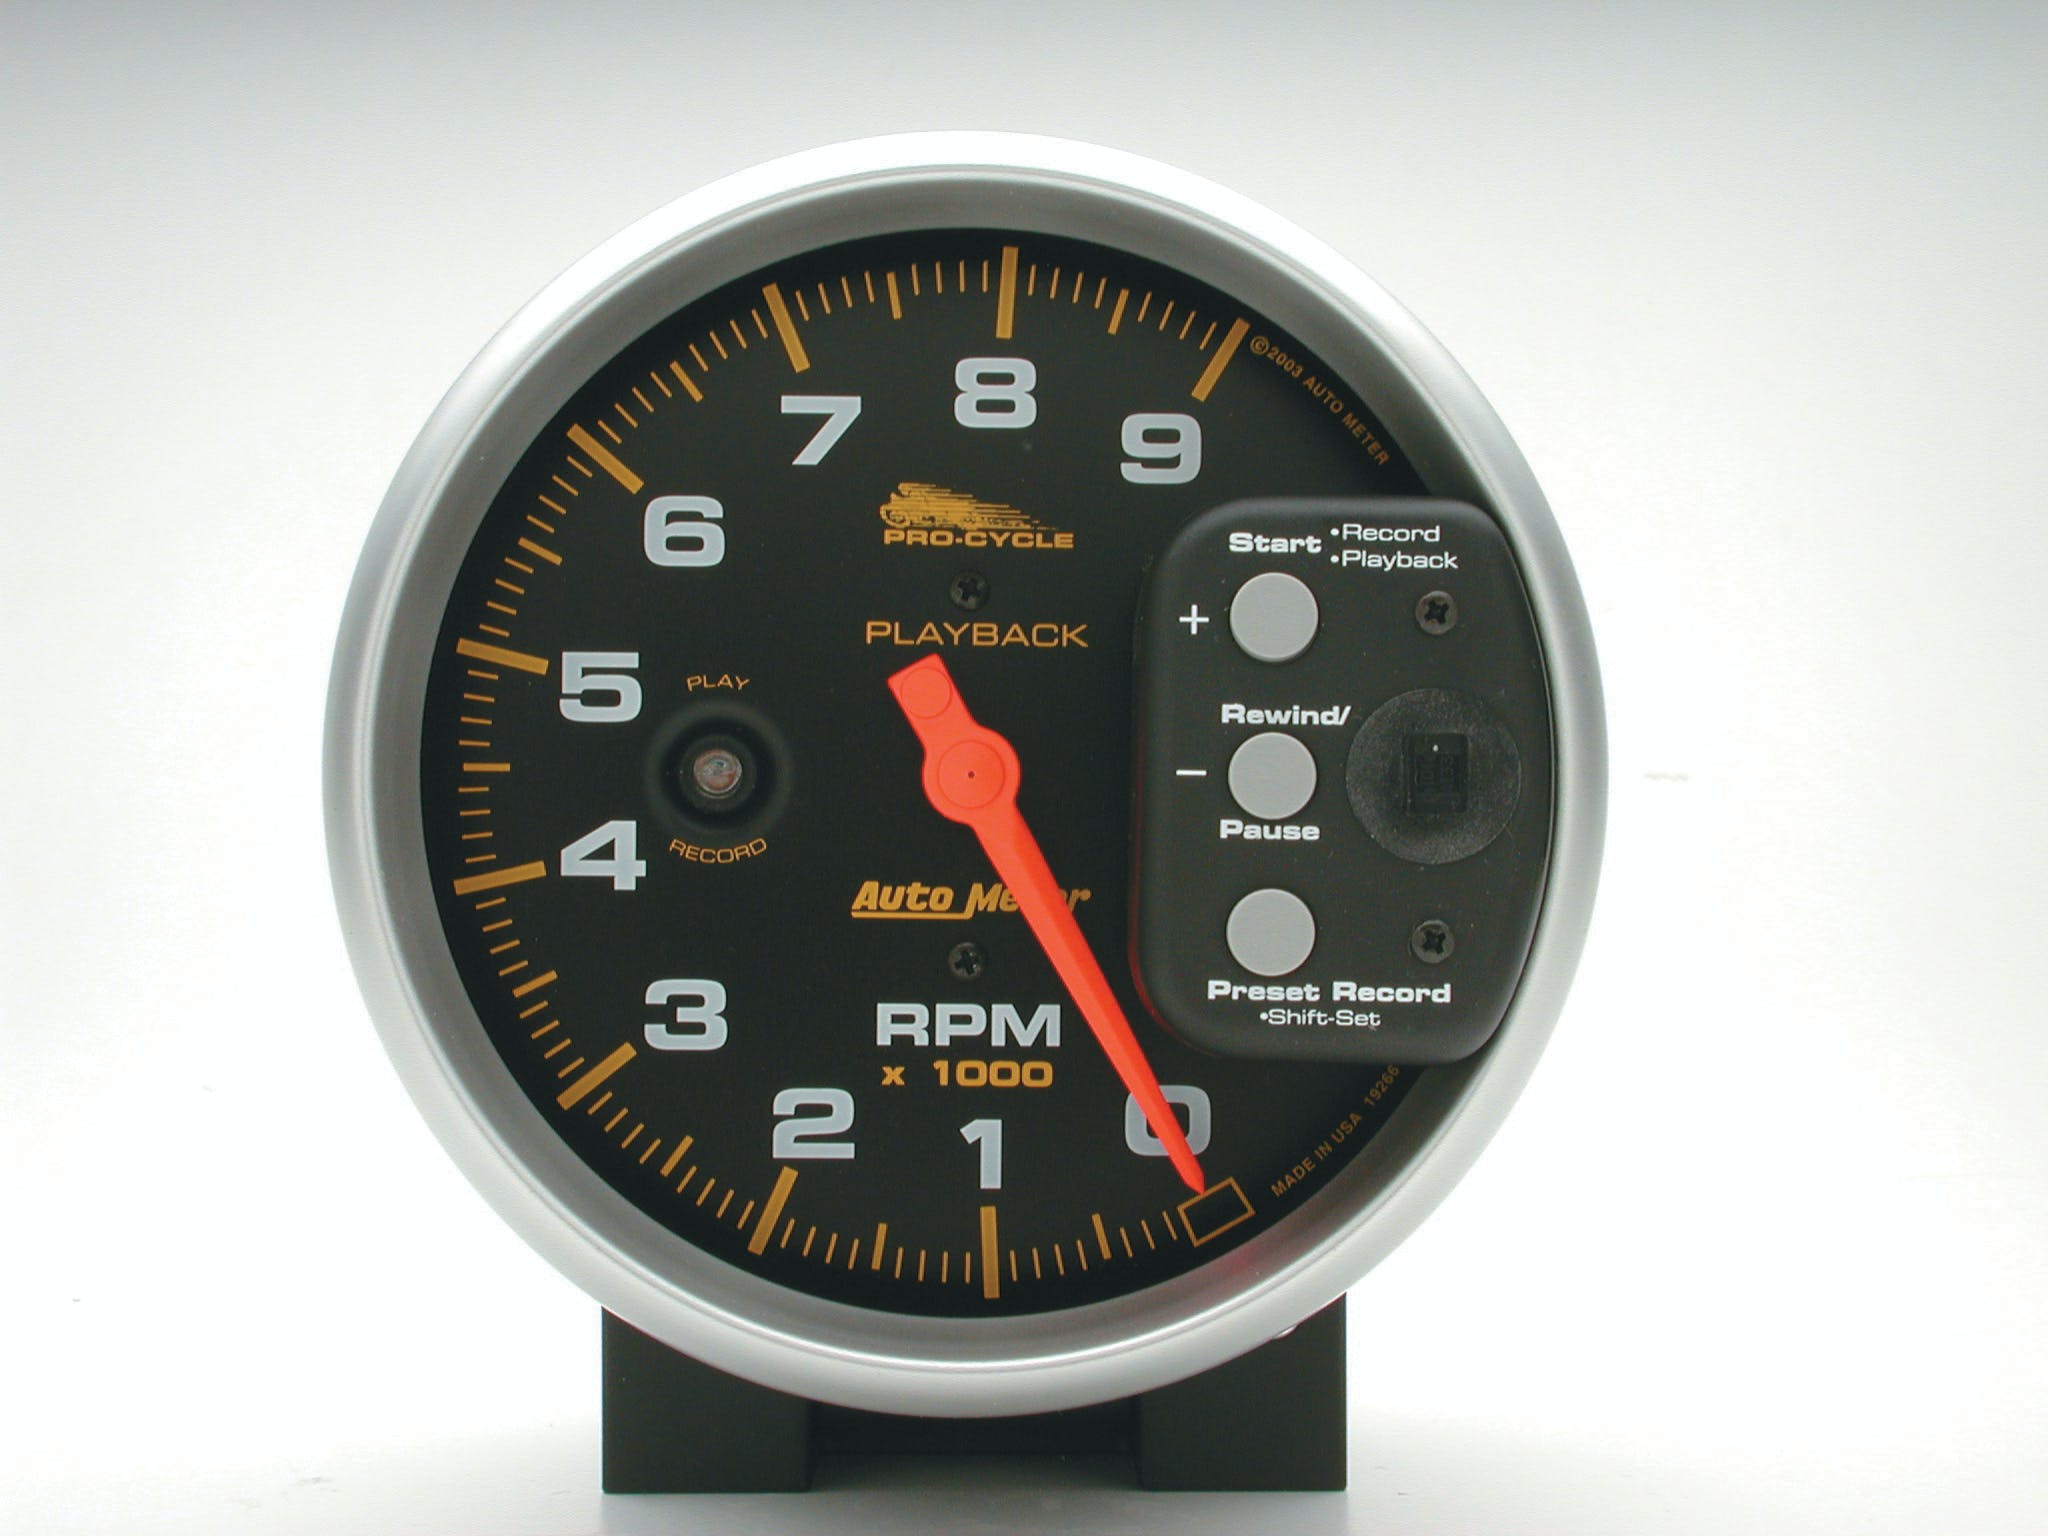 AutoMeter Products 19266 Tachometer Gauge, Black-Pro Cycle 5, 9K RPM, Pedestal with RPM Playback